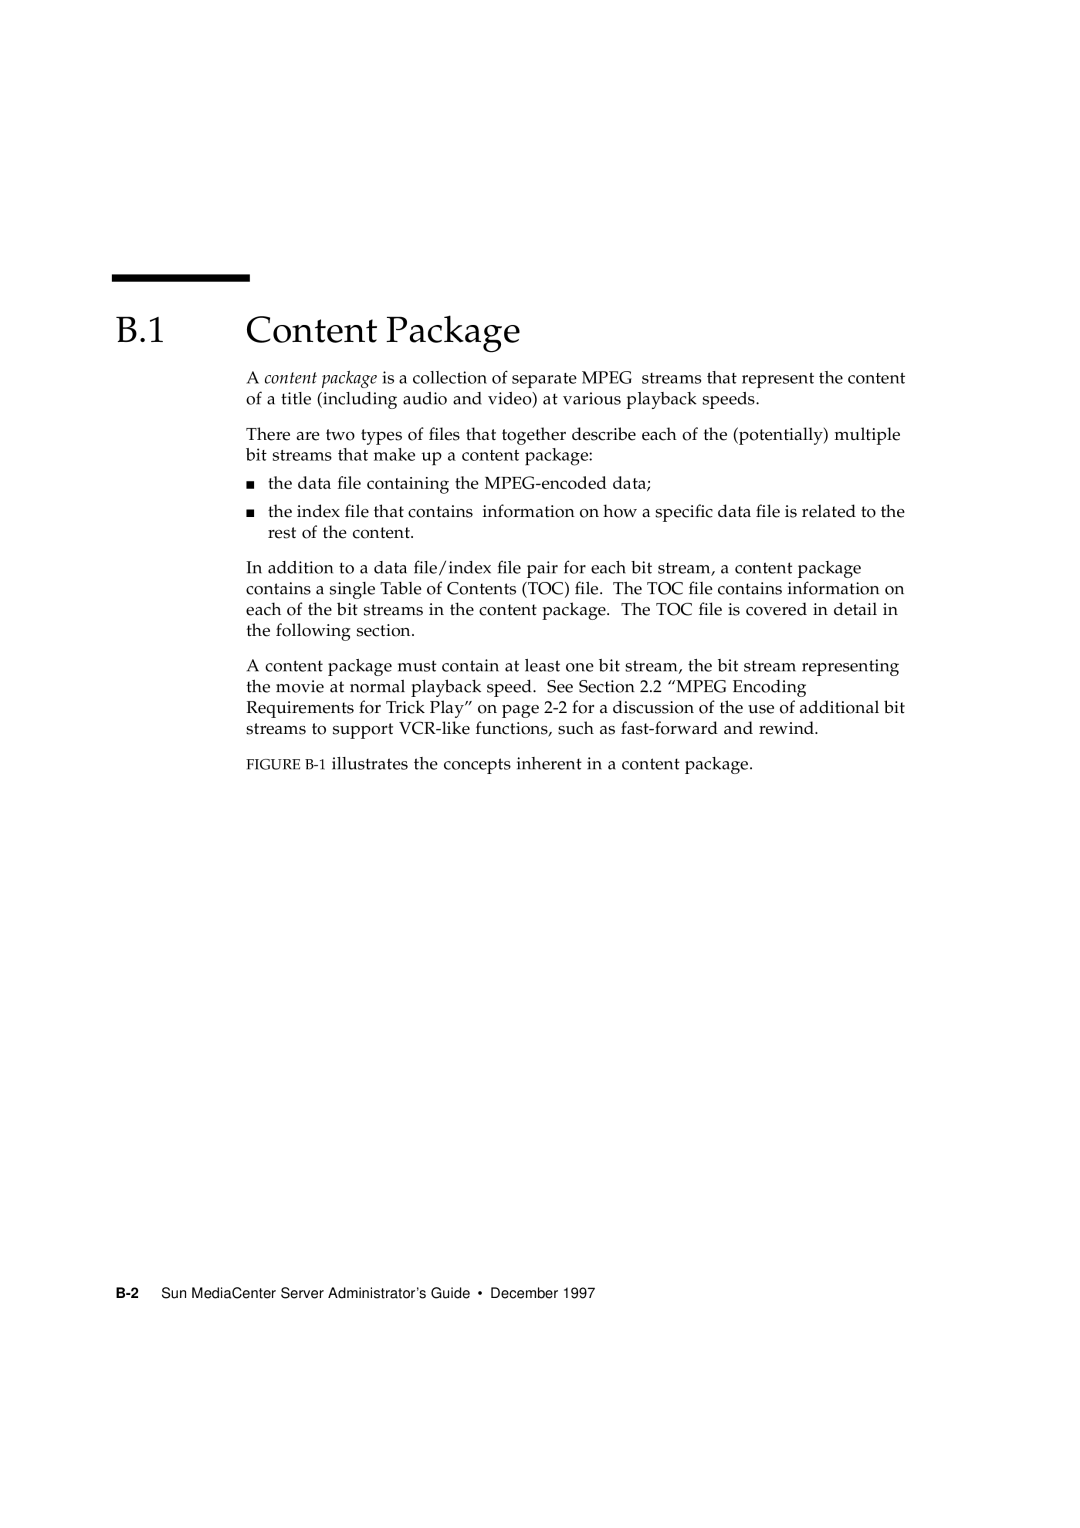 Sun Microsystems 2.1 manual B.1 Content Package 